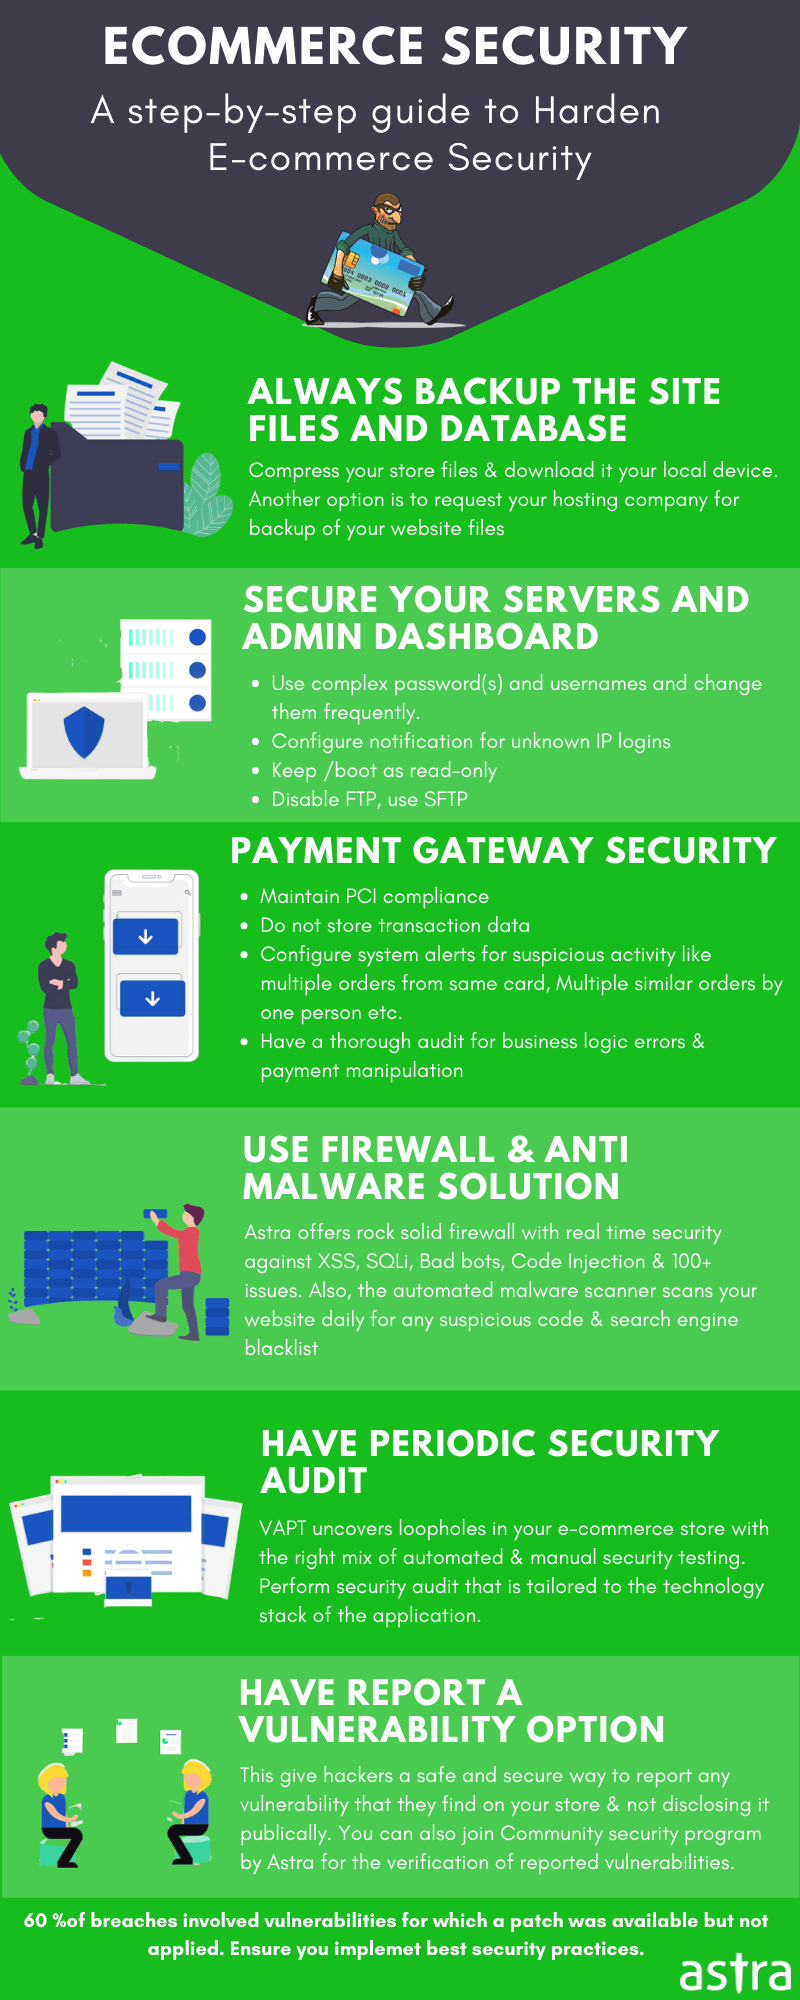 Infographic for hardening the E-commerce security